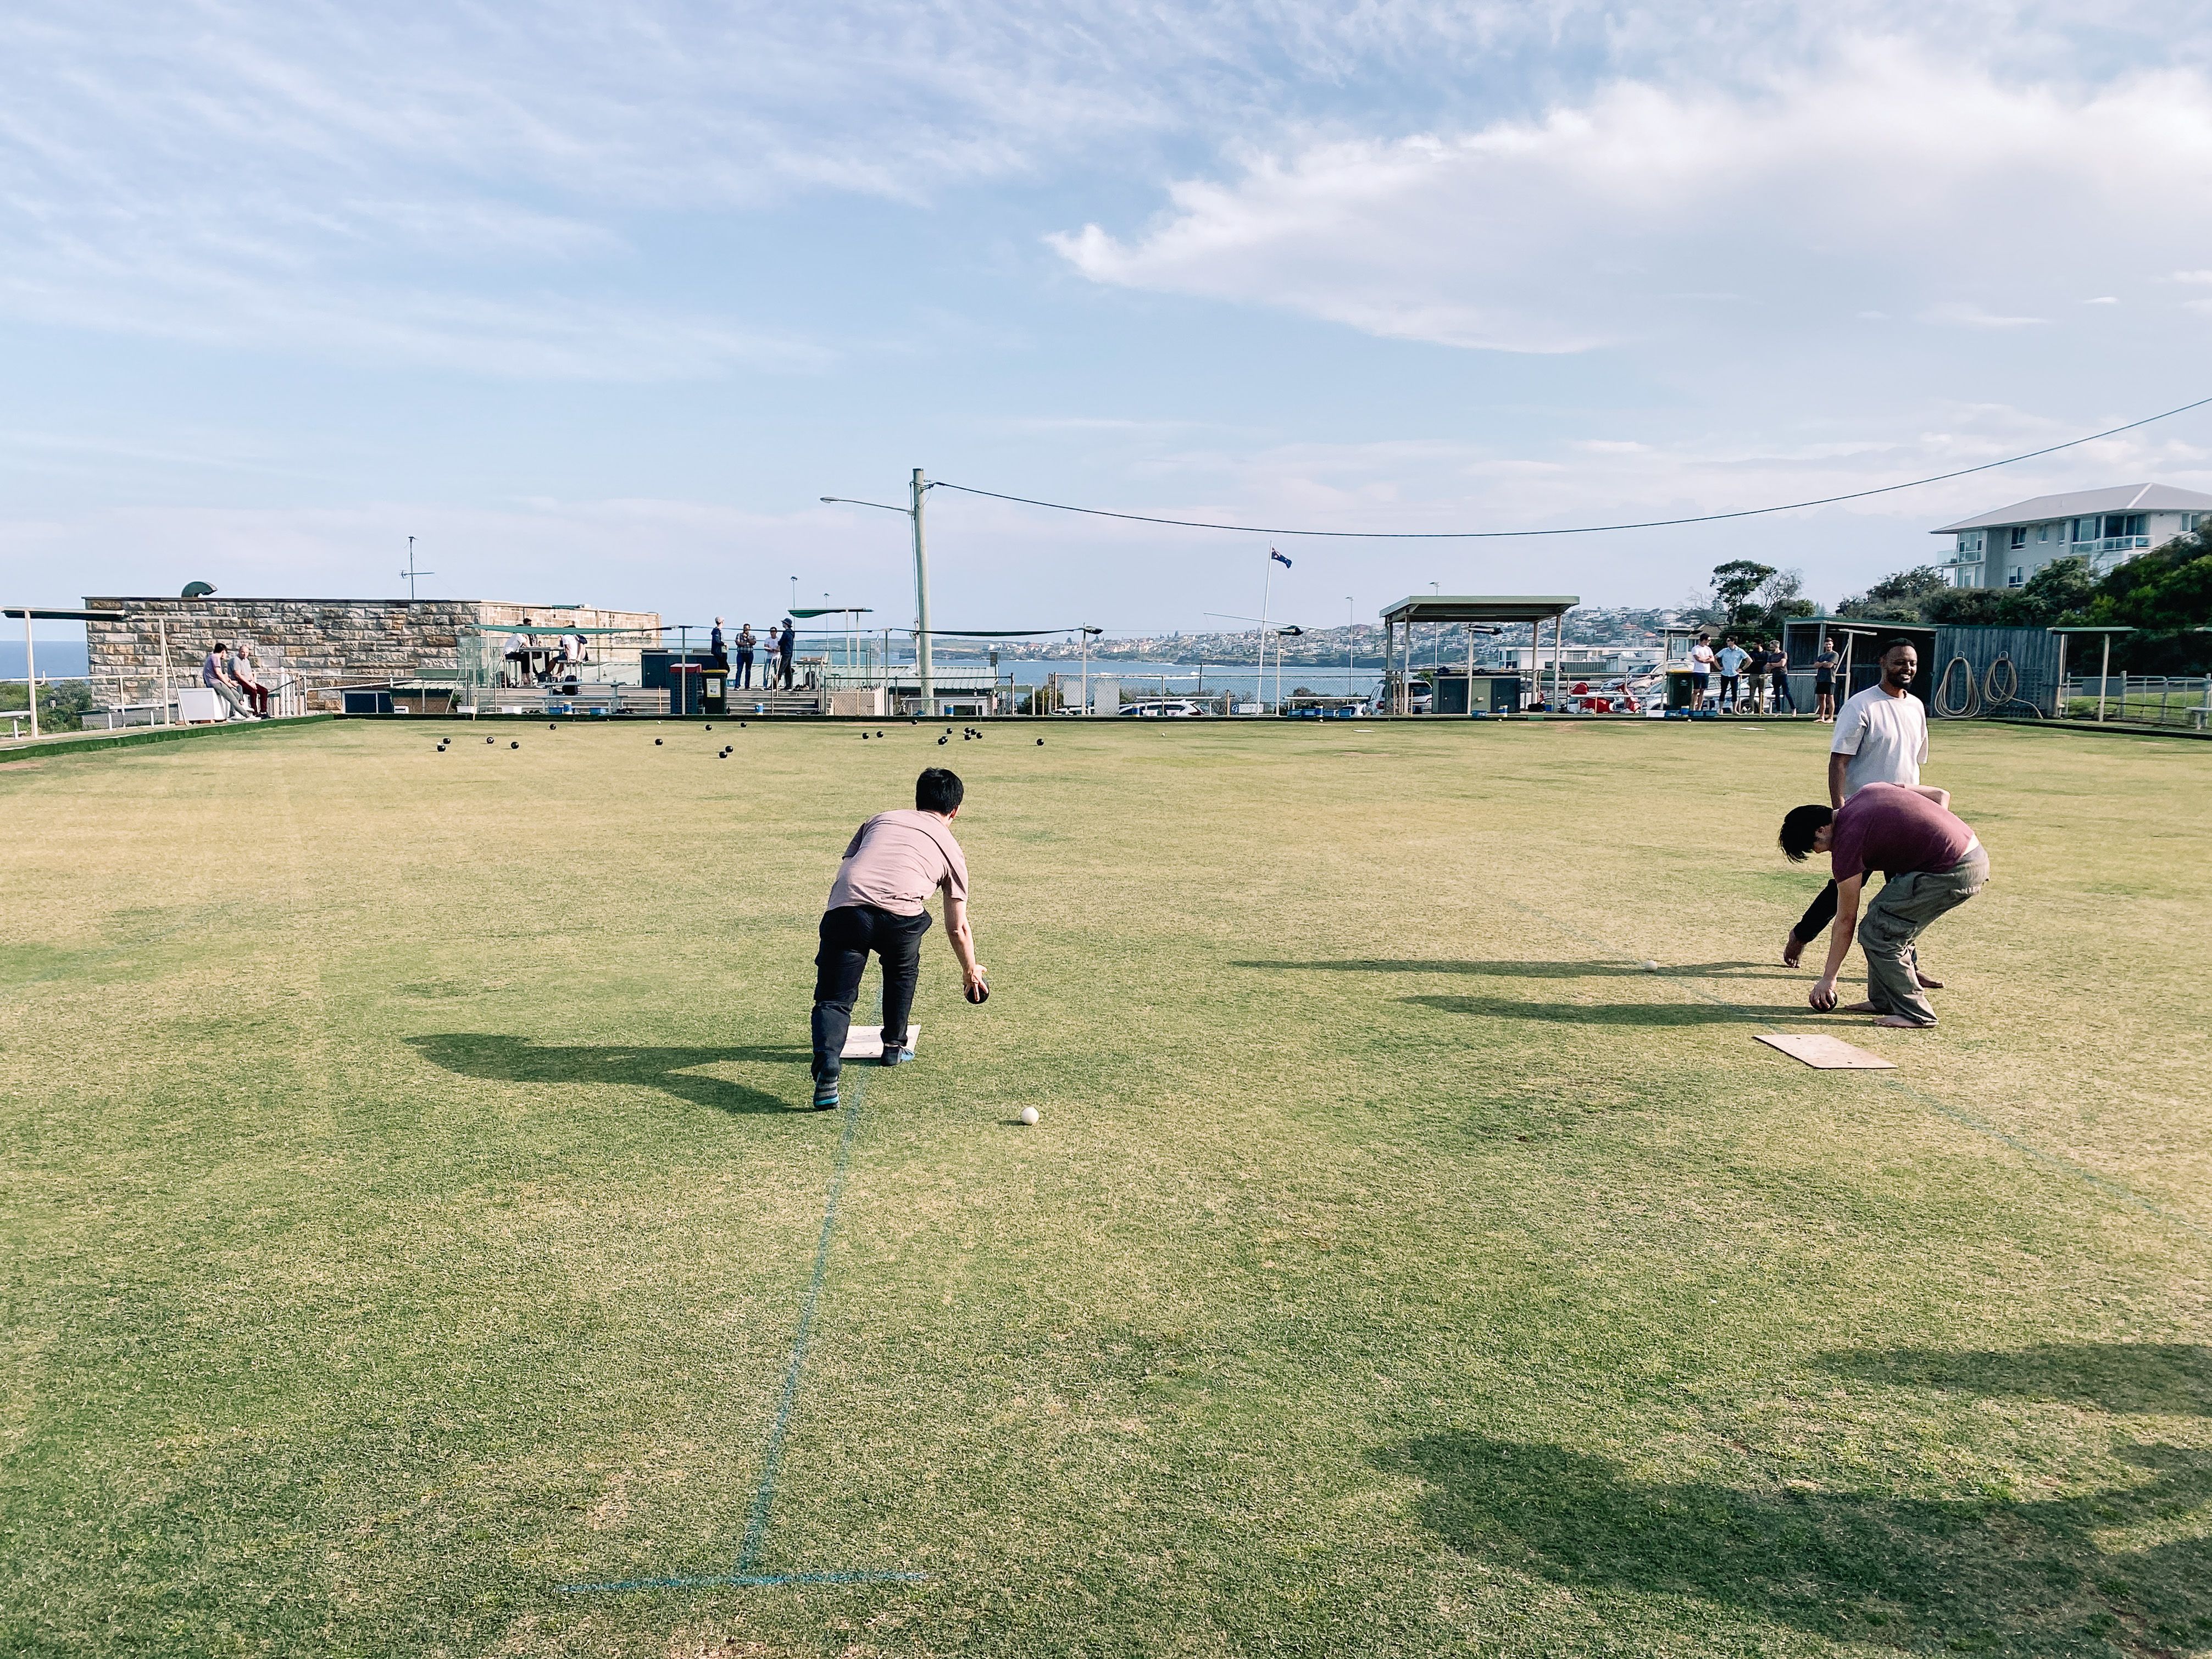 A photo looking down a lawn bowls green (very short, well-manicured grass, similar to a golf course), with a person bending down mid-bowl and a bunch of the balls already at the other end of the green close.